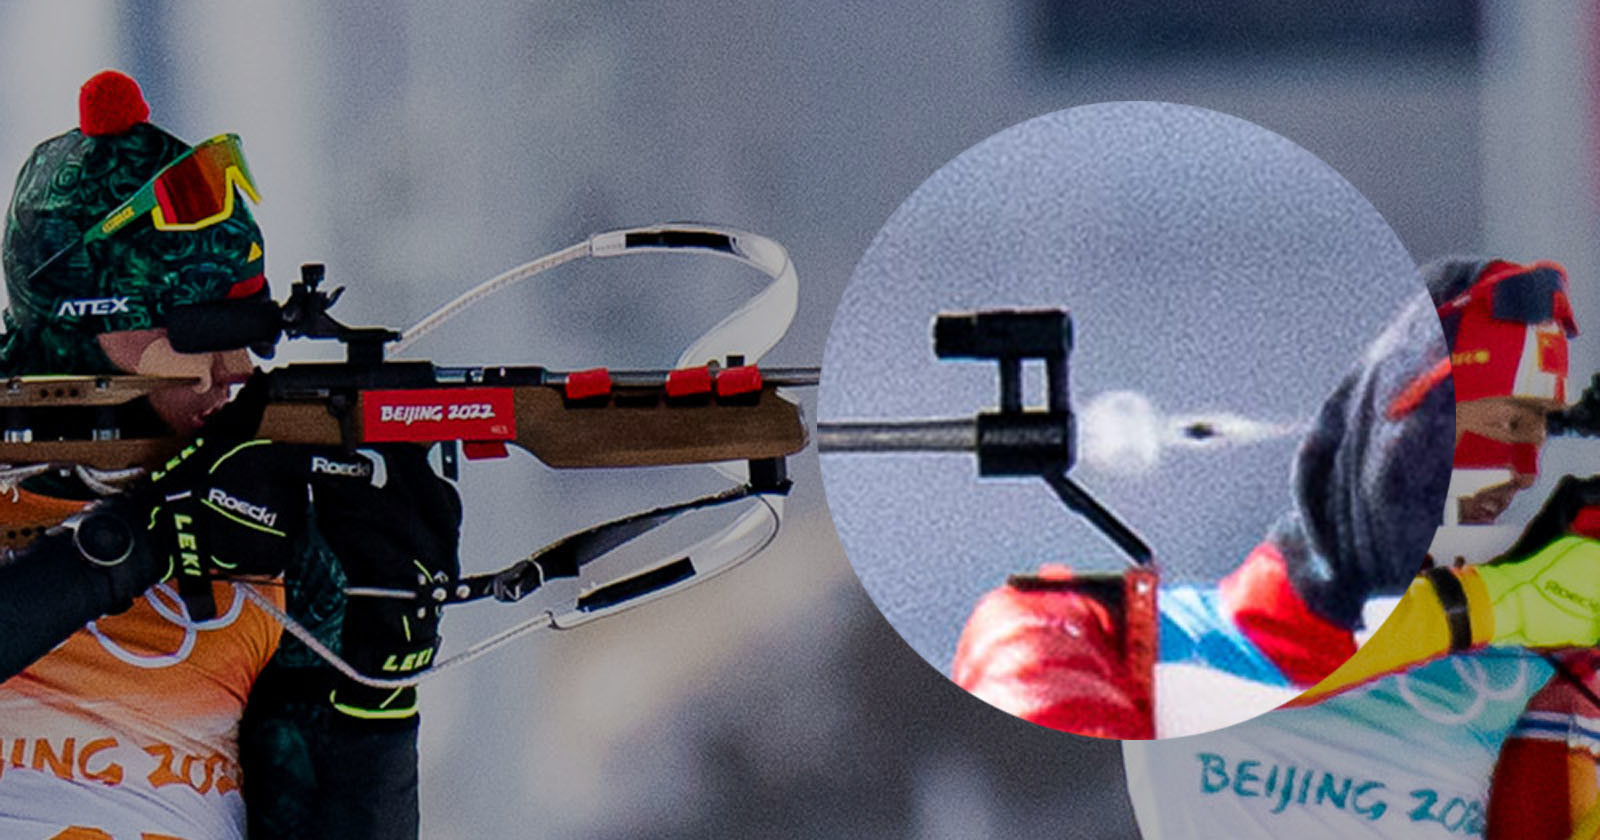  olympic photographer catches bullets mid-air sony 